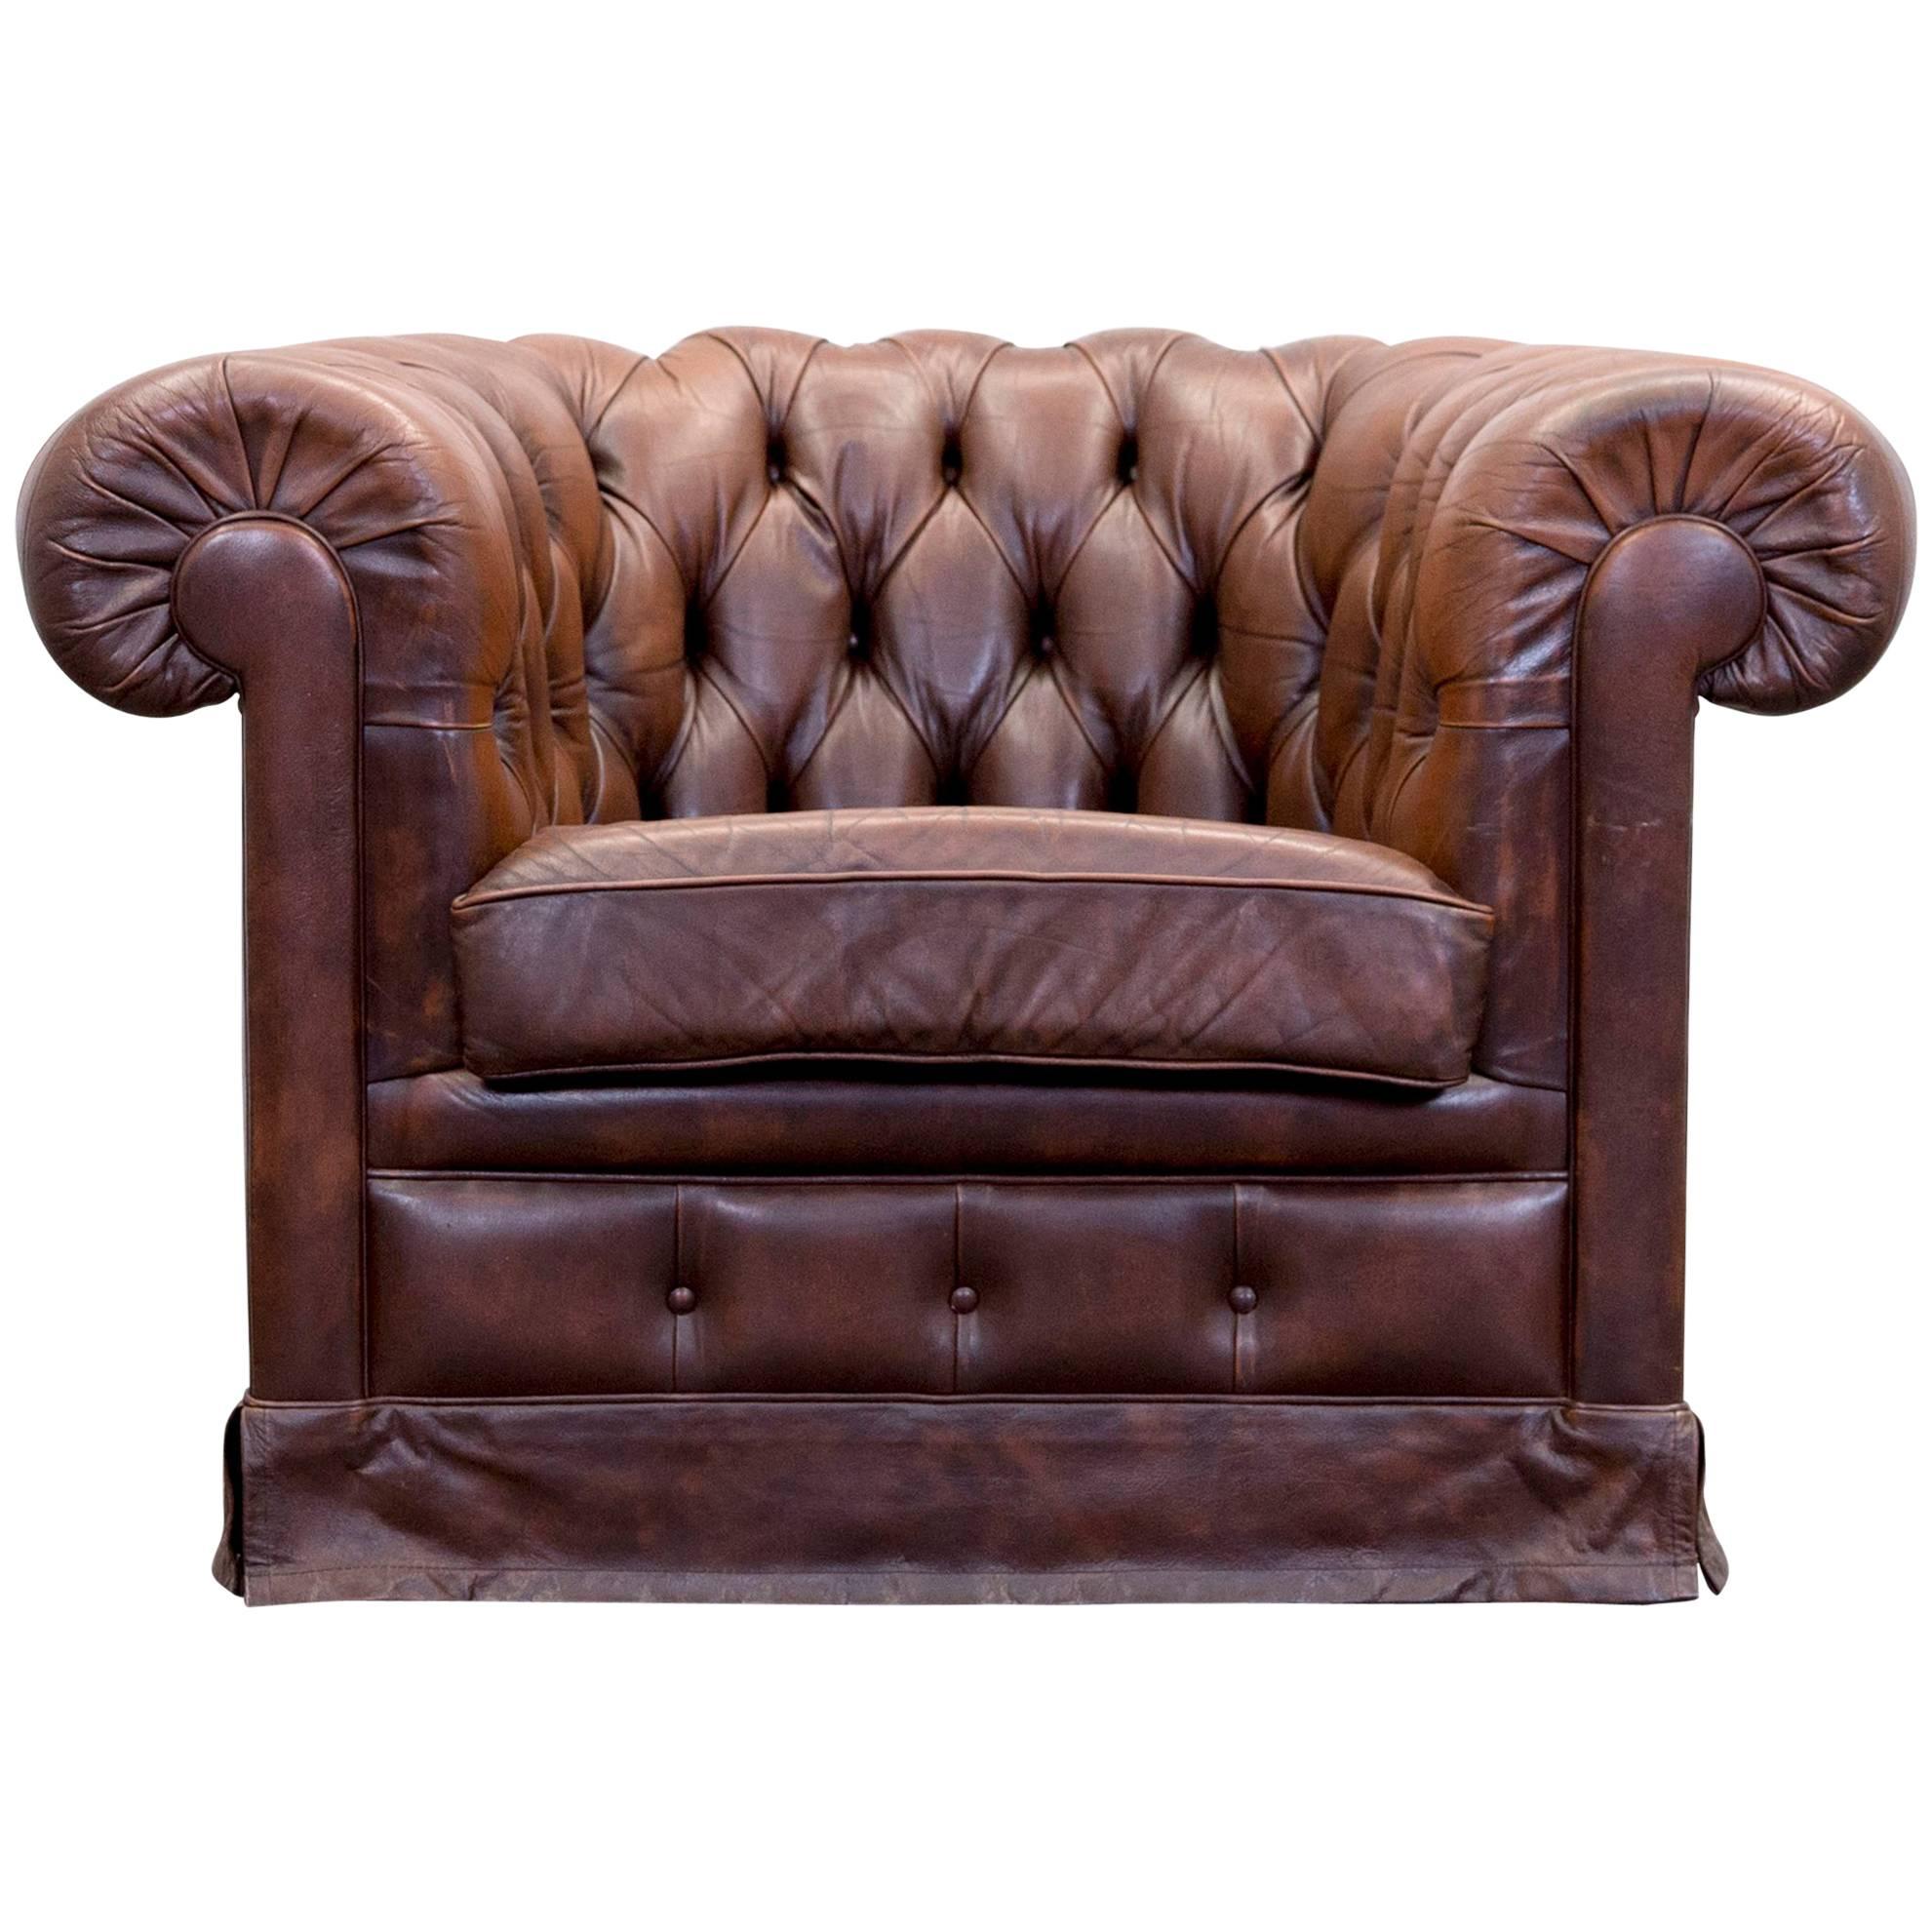 Original Chesterfield Leather Armchair in Brown Vintage Retro